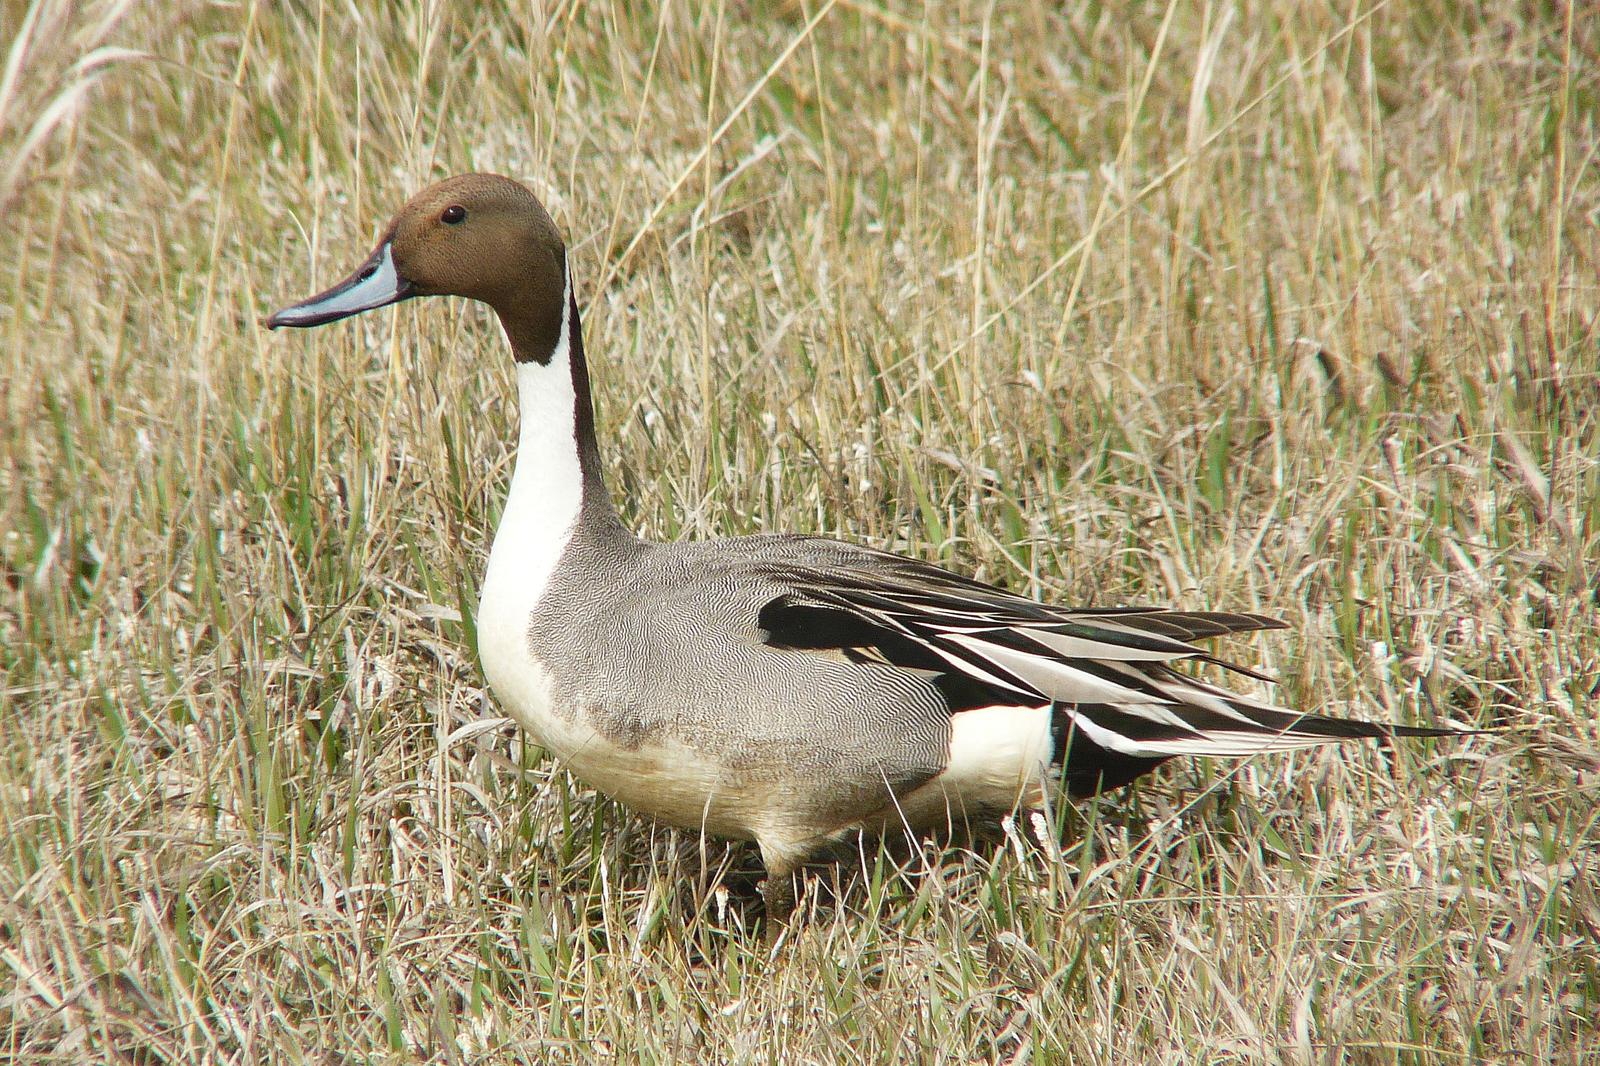 Northern Pintail Photo by Bob Neugebauer